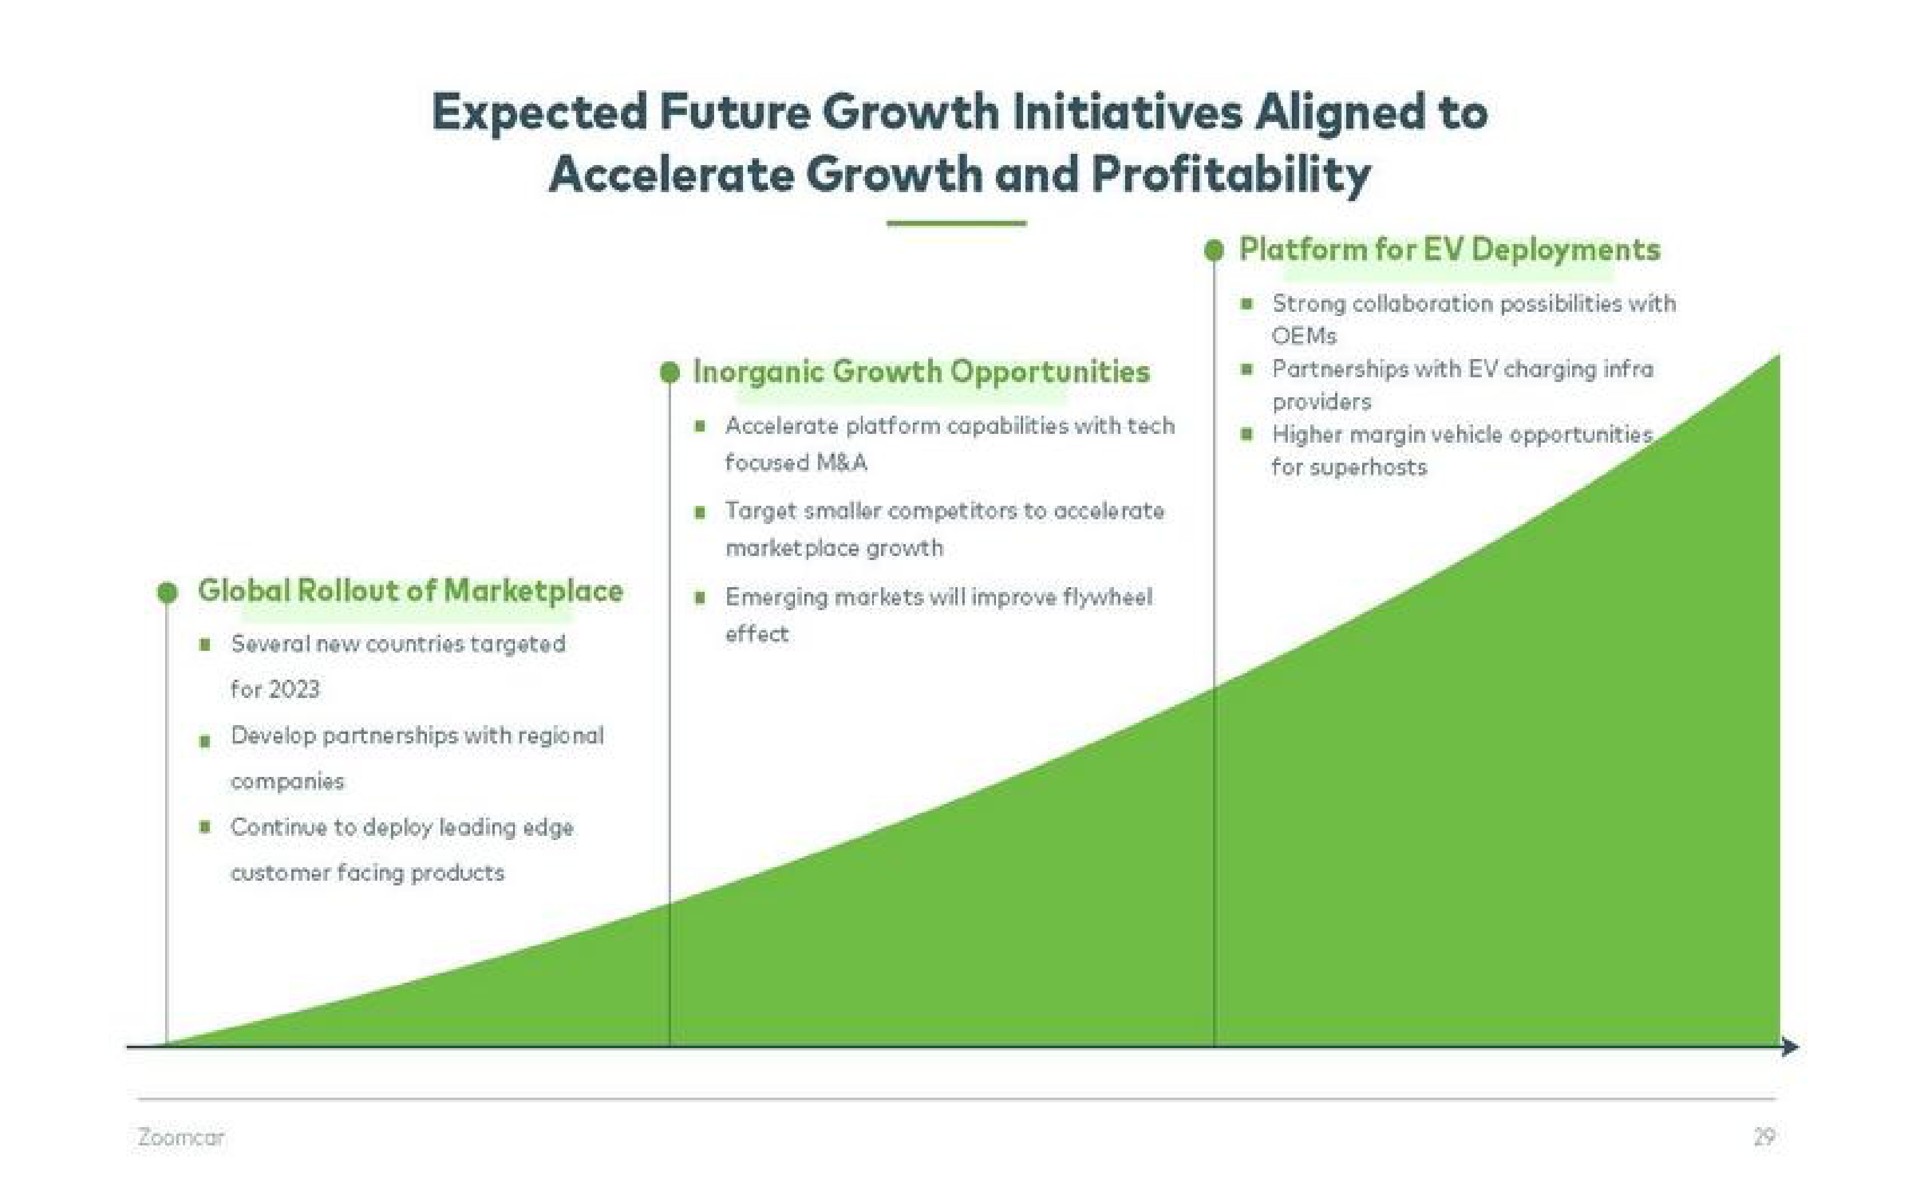 expected future growth initiatives aligned to accelerate growth and profitability | Zoomcar